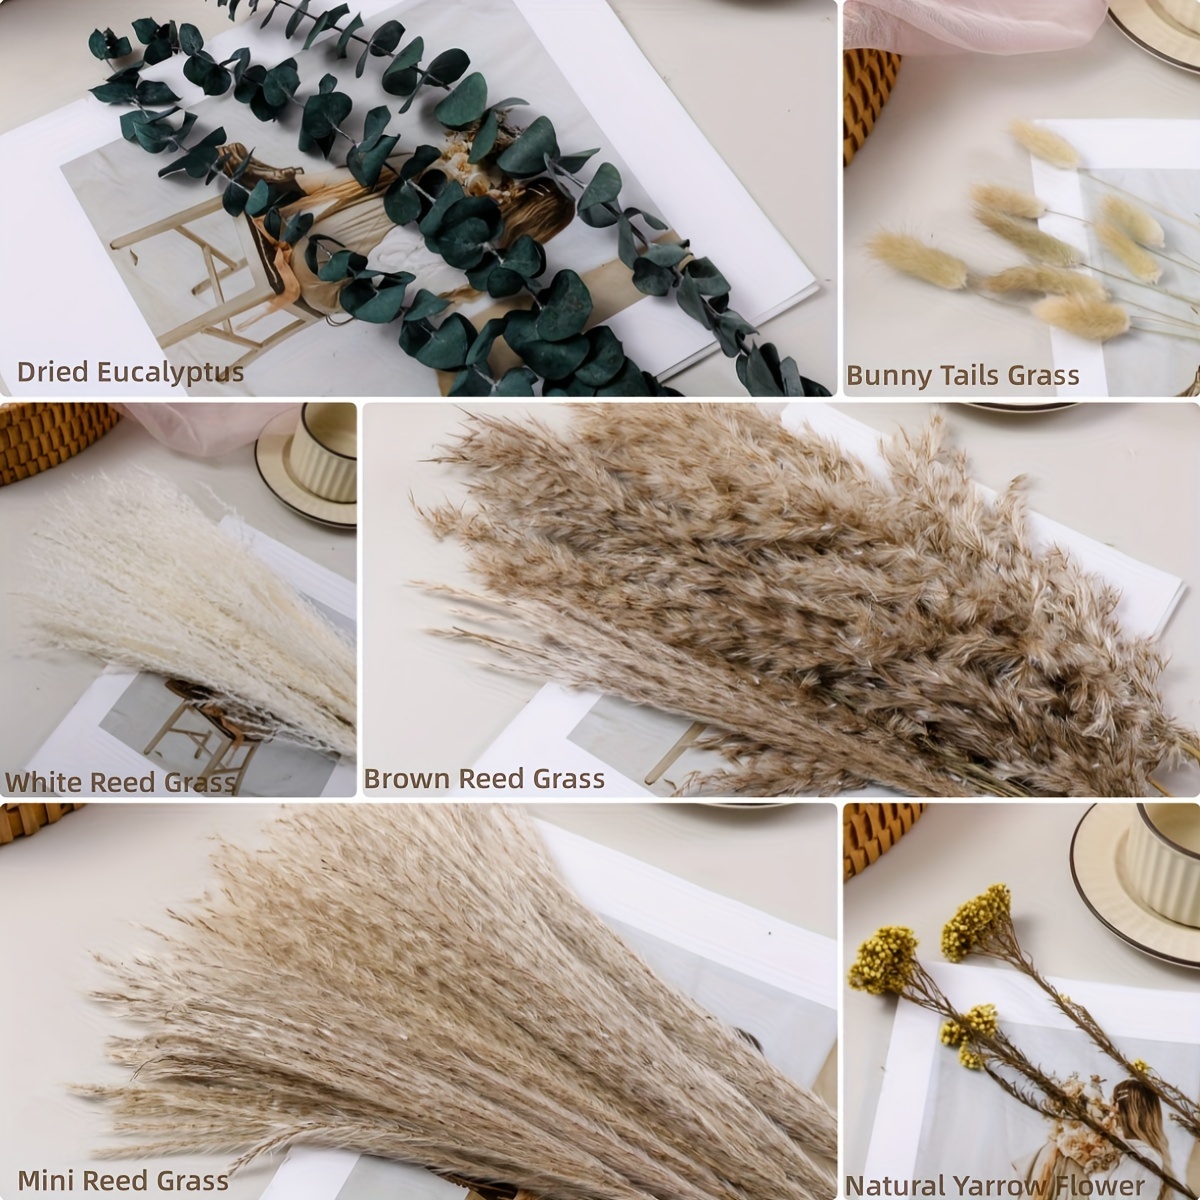 Musunny Natural Dried Flower Bouquet,17 Dried Flowers for